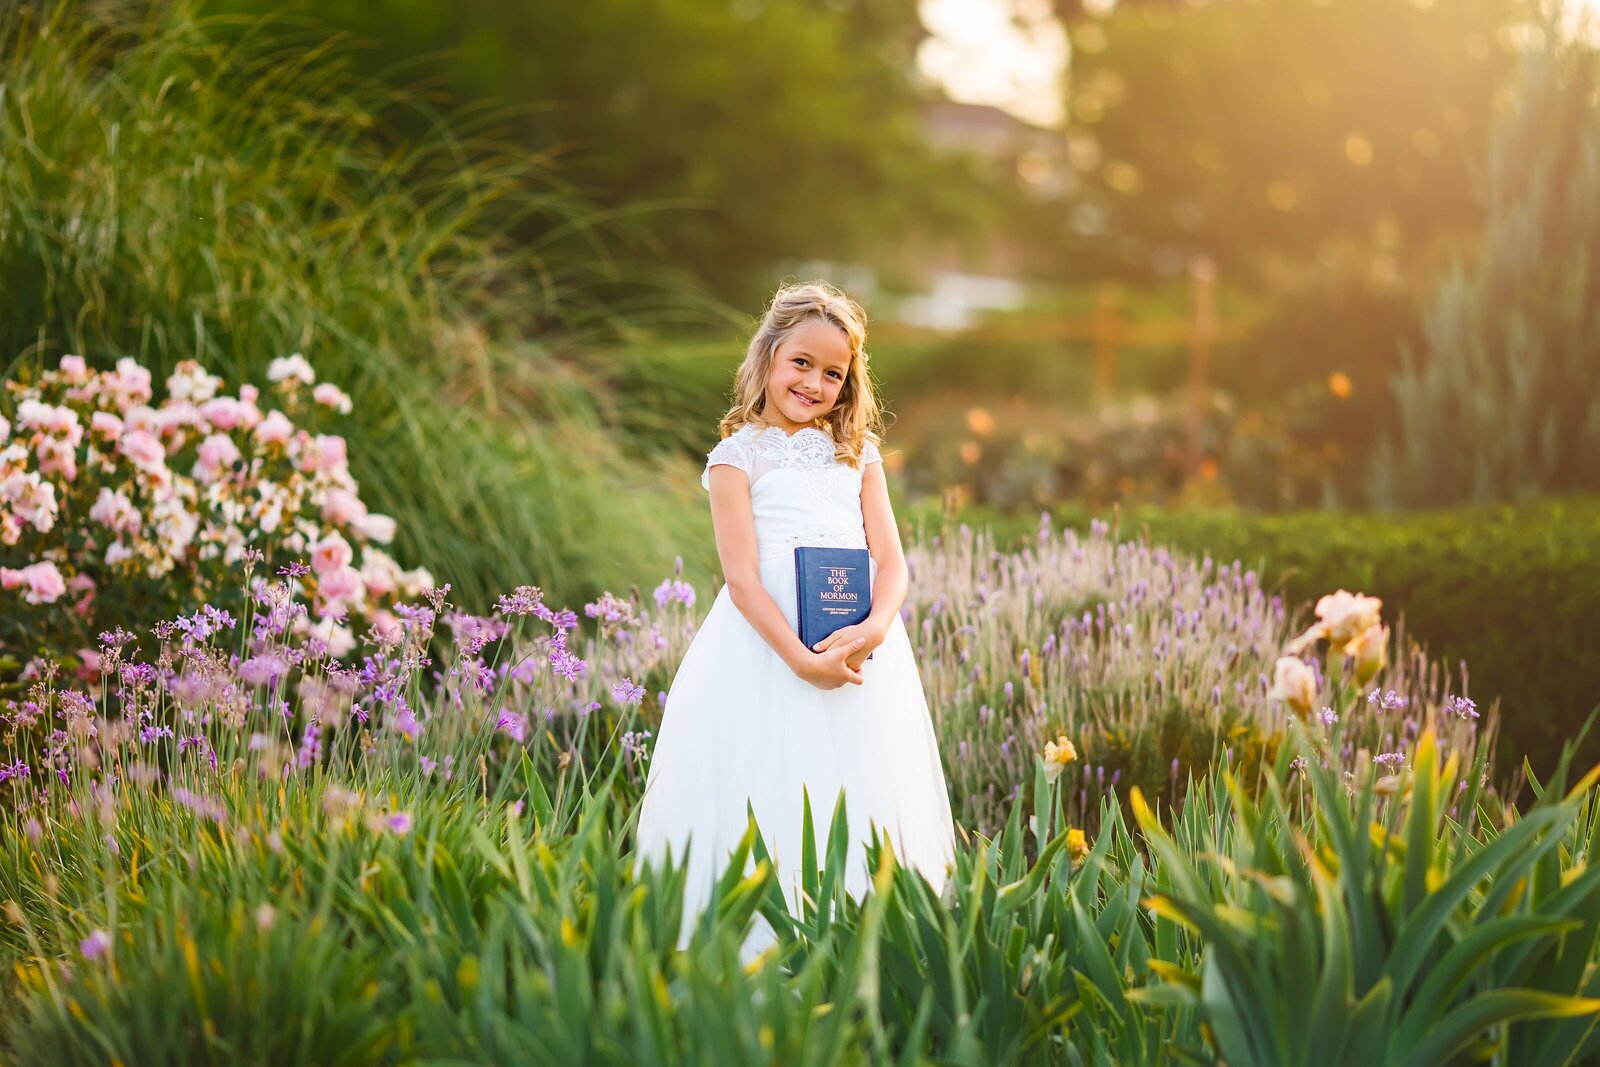 young girl posing with book in a flower field